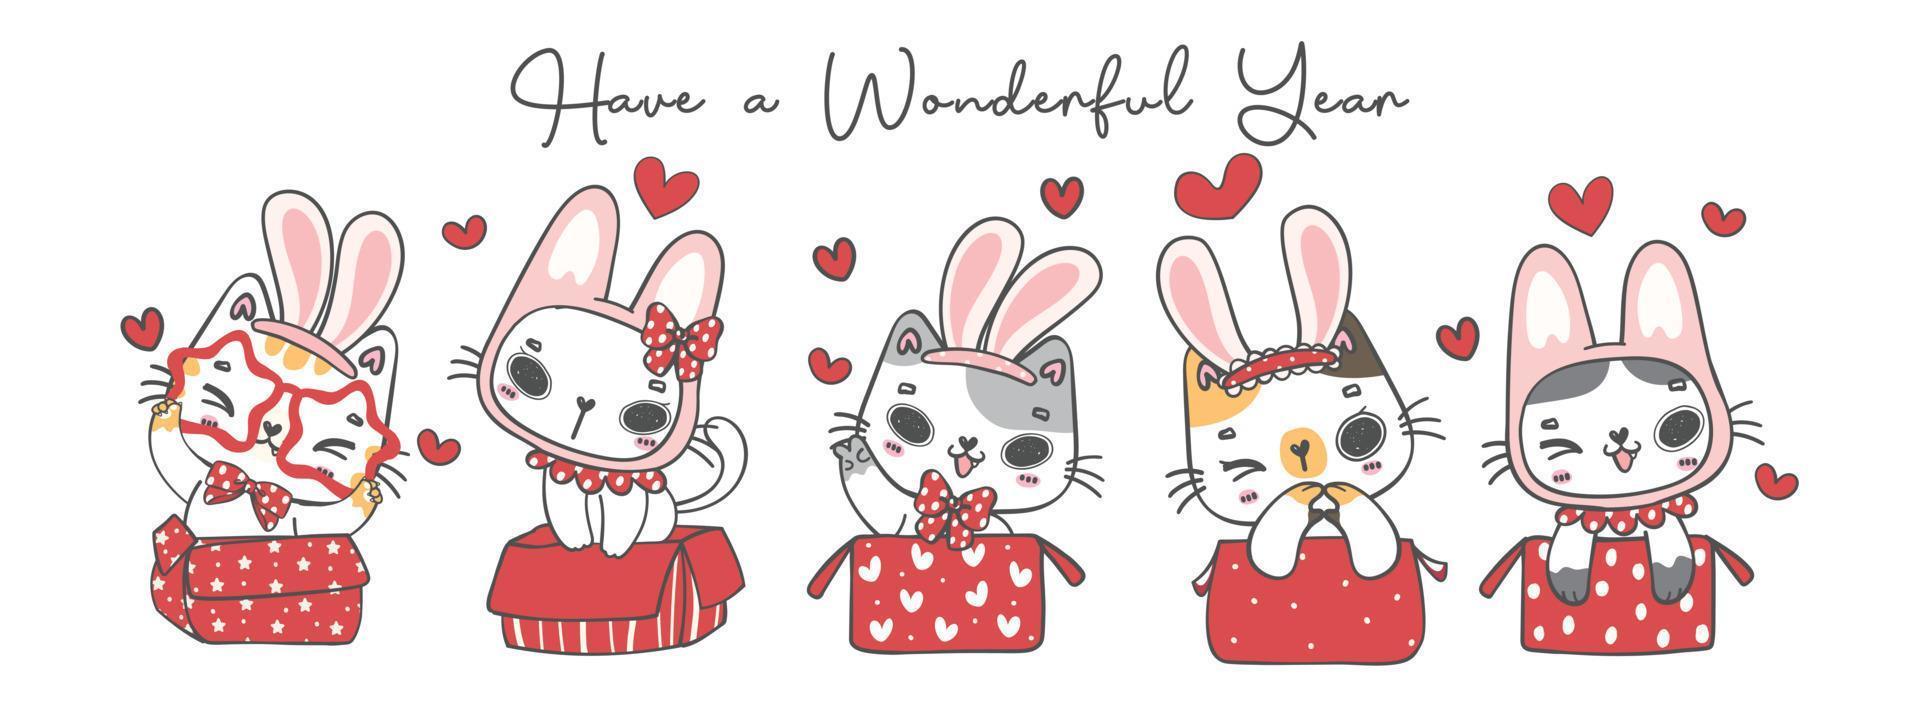 group of kawaii kitten cats wear bunny rabbit ears, in red boxes, have a wonderful year, cartoon character pet animal doodle hand drawing illustration vector